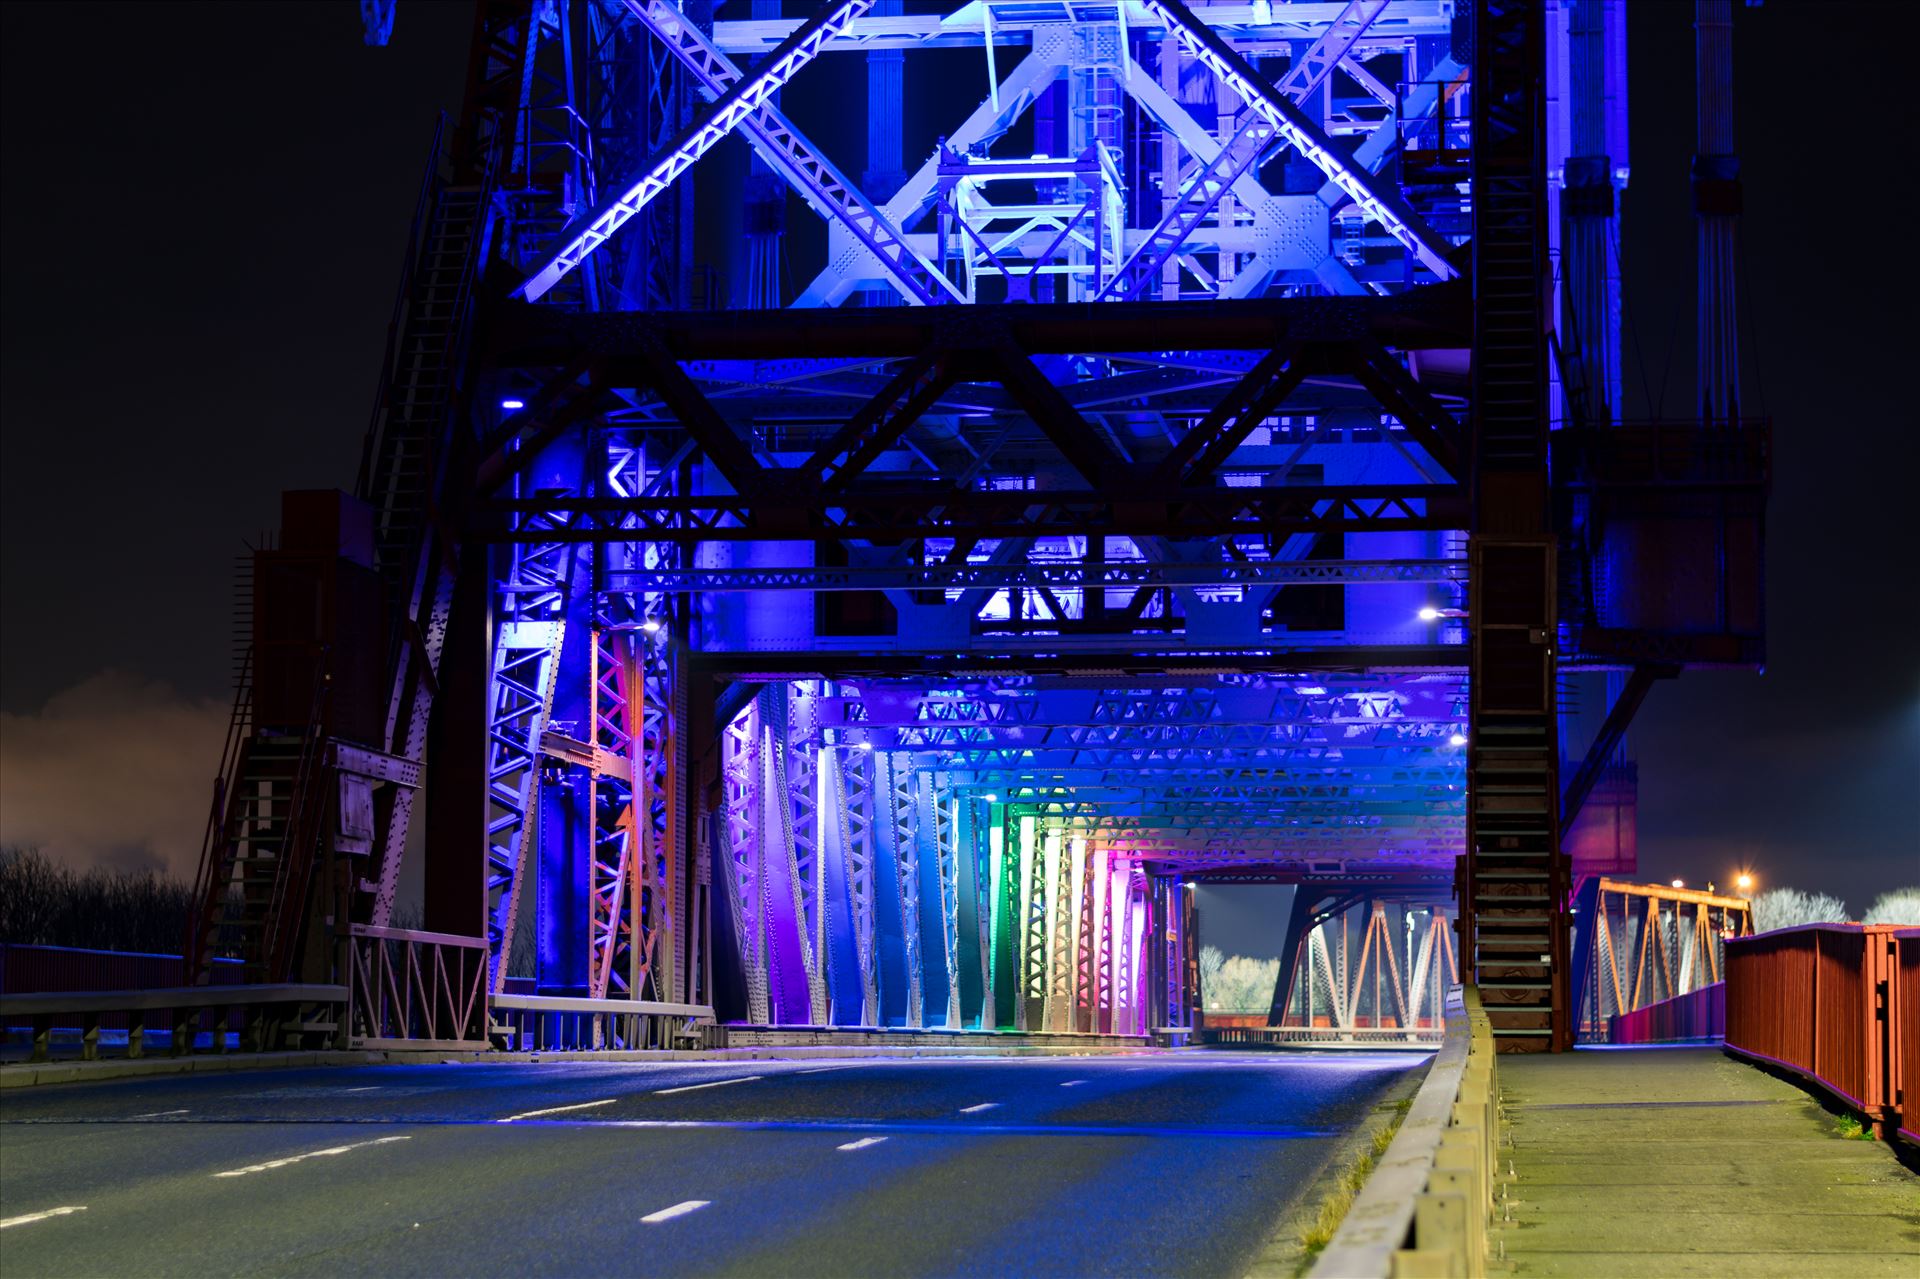 Newport Bridge Rainbow Lights - Taken boxing night down by the river Tees, Newport bridge looked amazing by AJ Stoves Photography